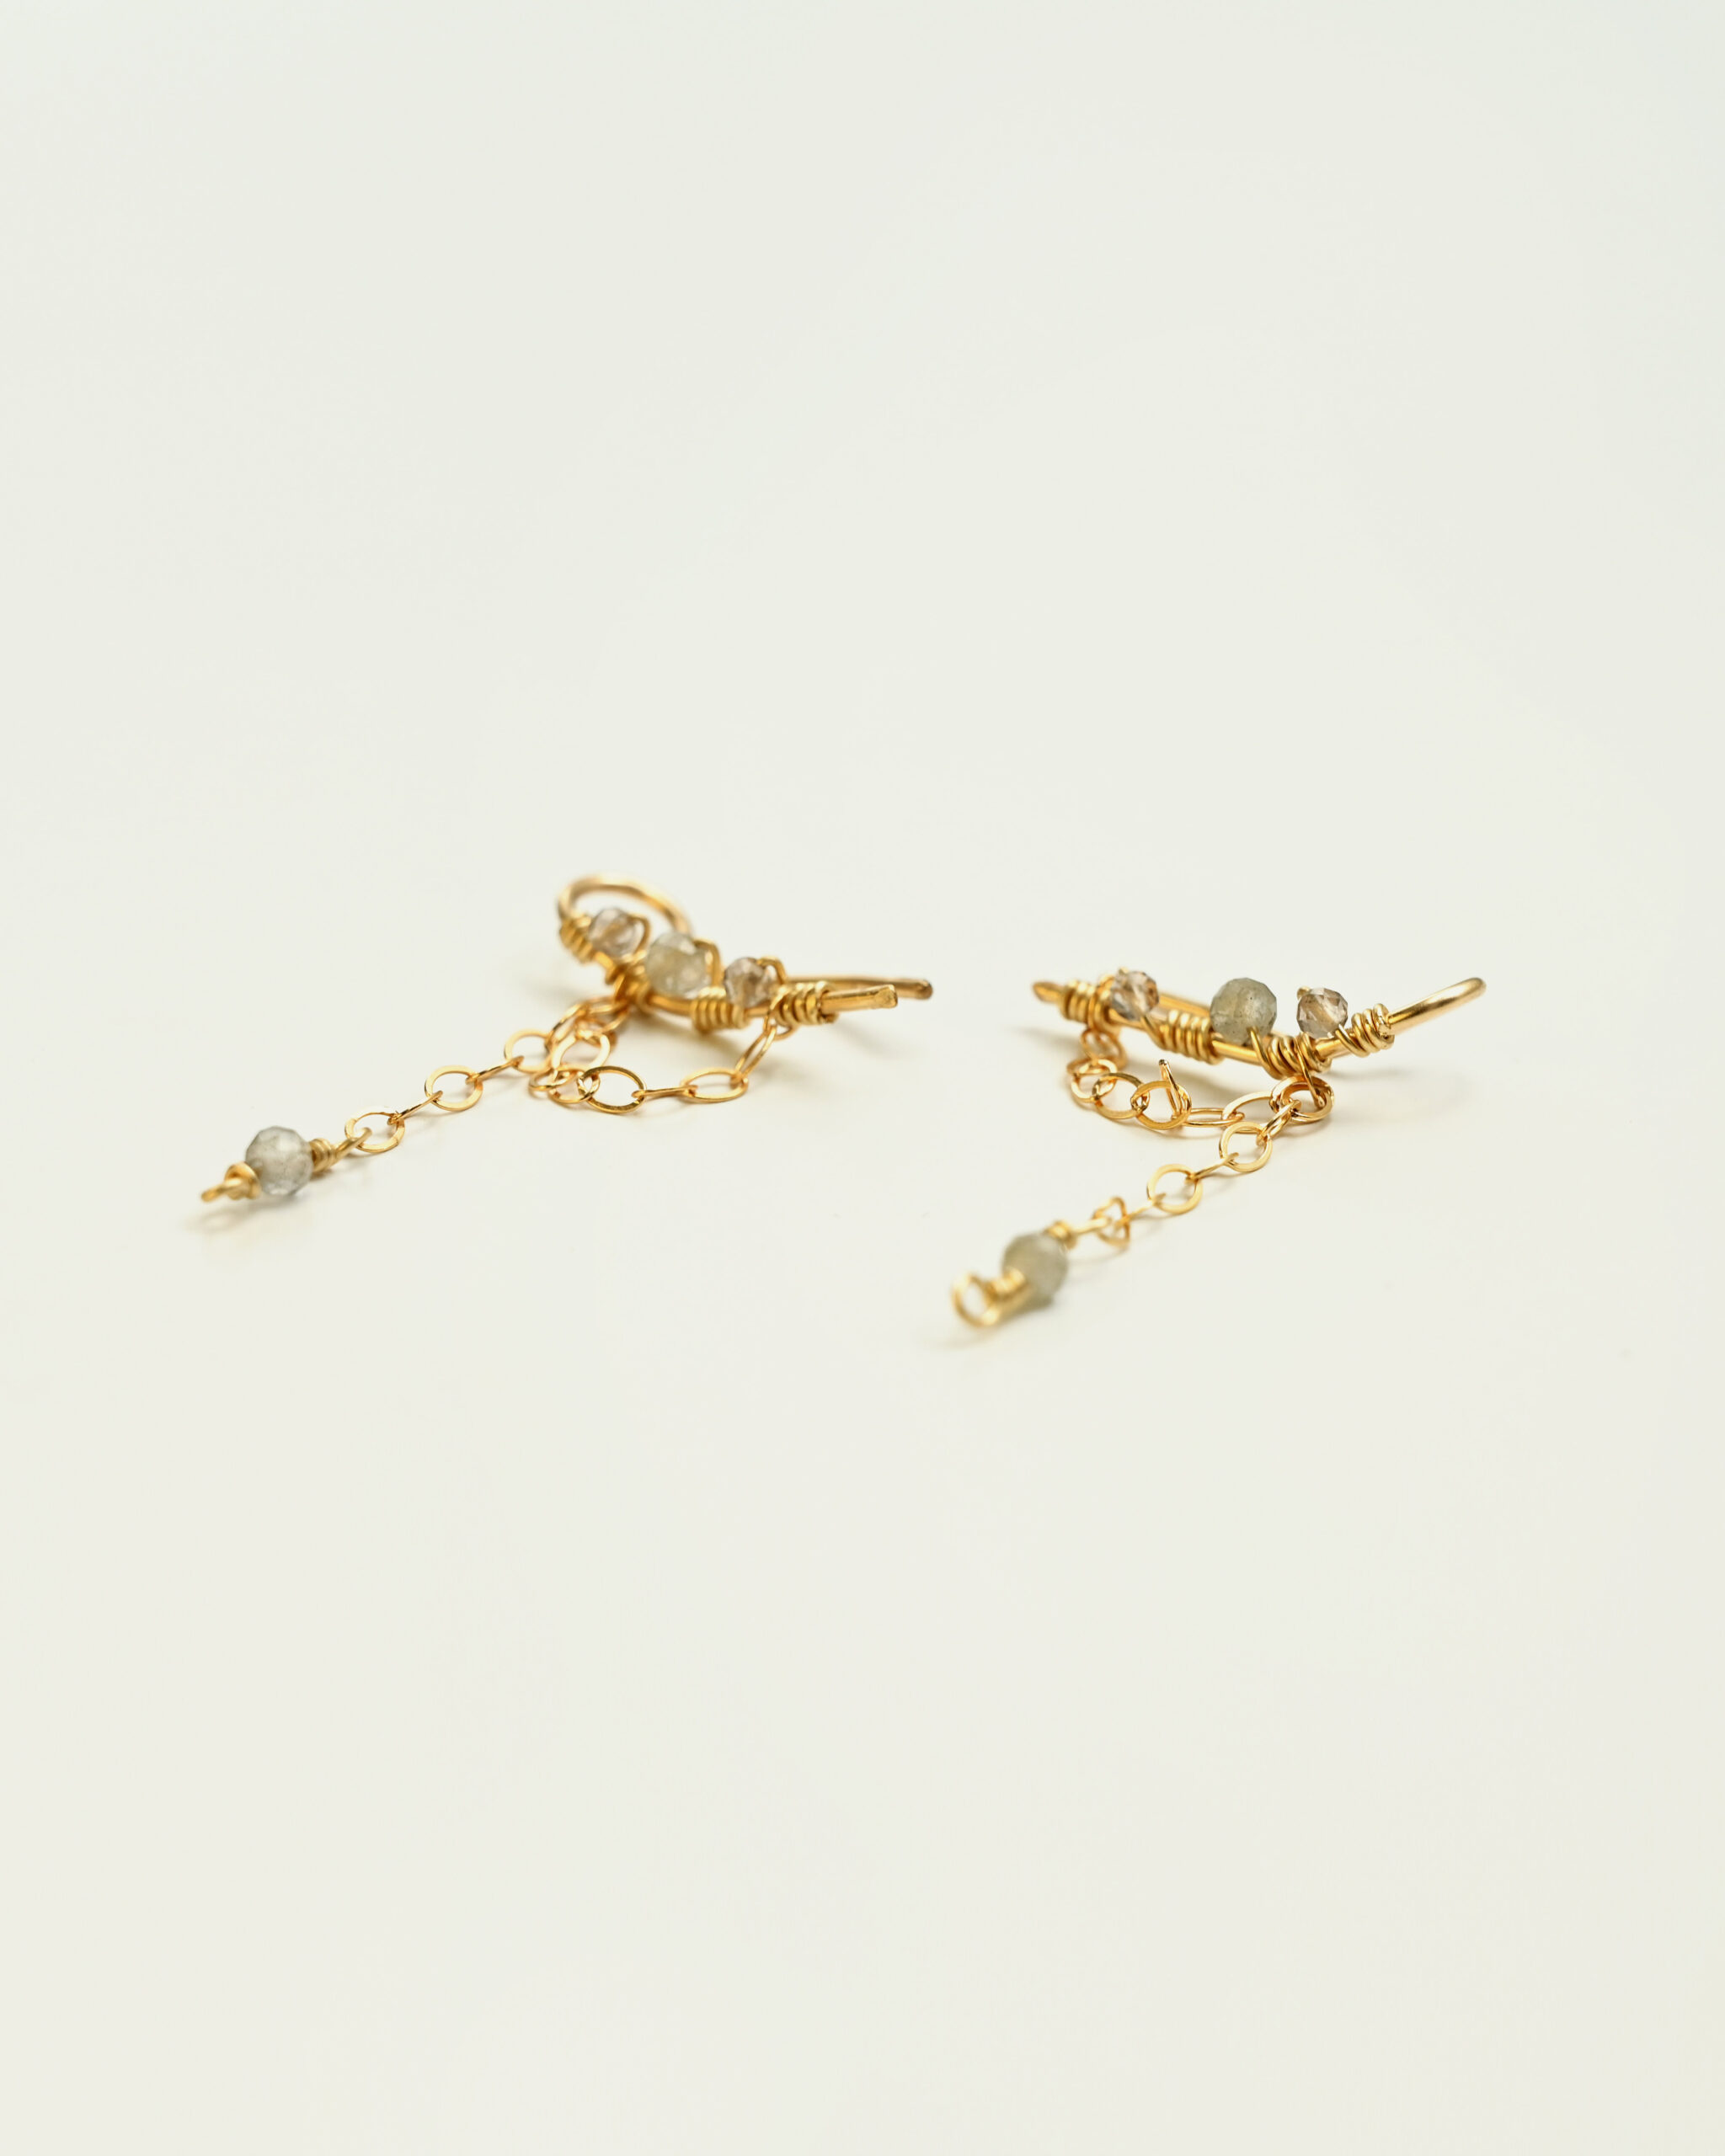 14k gold filled fine earrings with labradorite and smoky quartz and chains